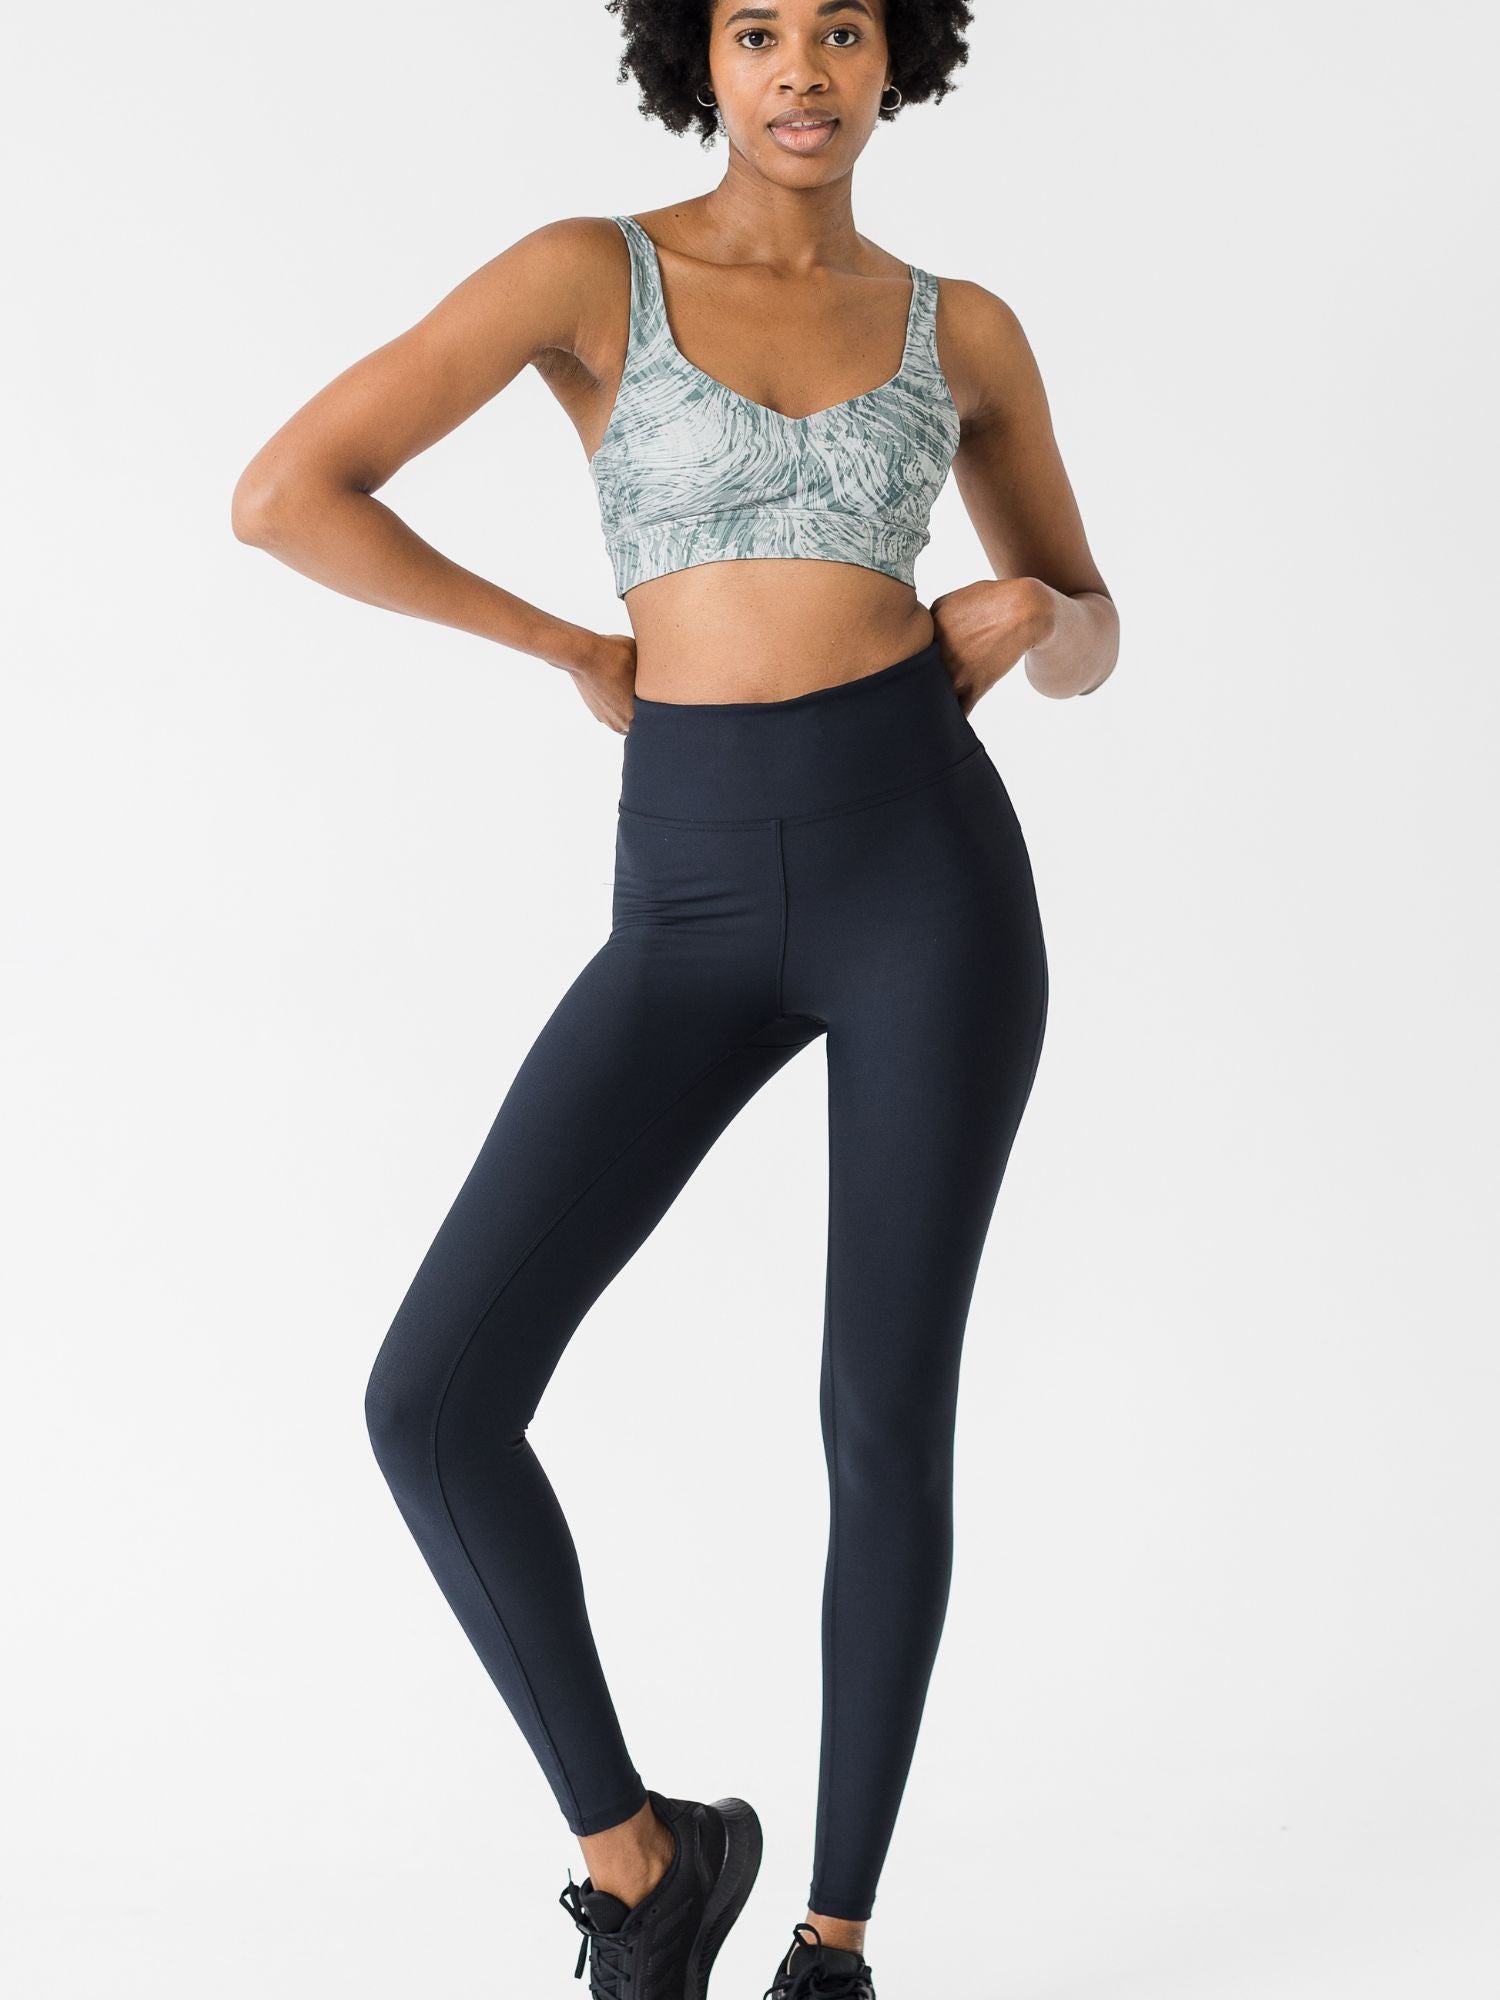 These $50 Best-Selling Yoga Pants Are Majorly Marked Down to Just $26 at  Amazon